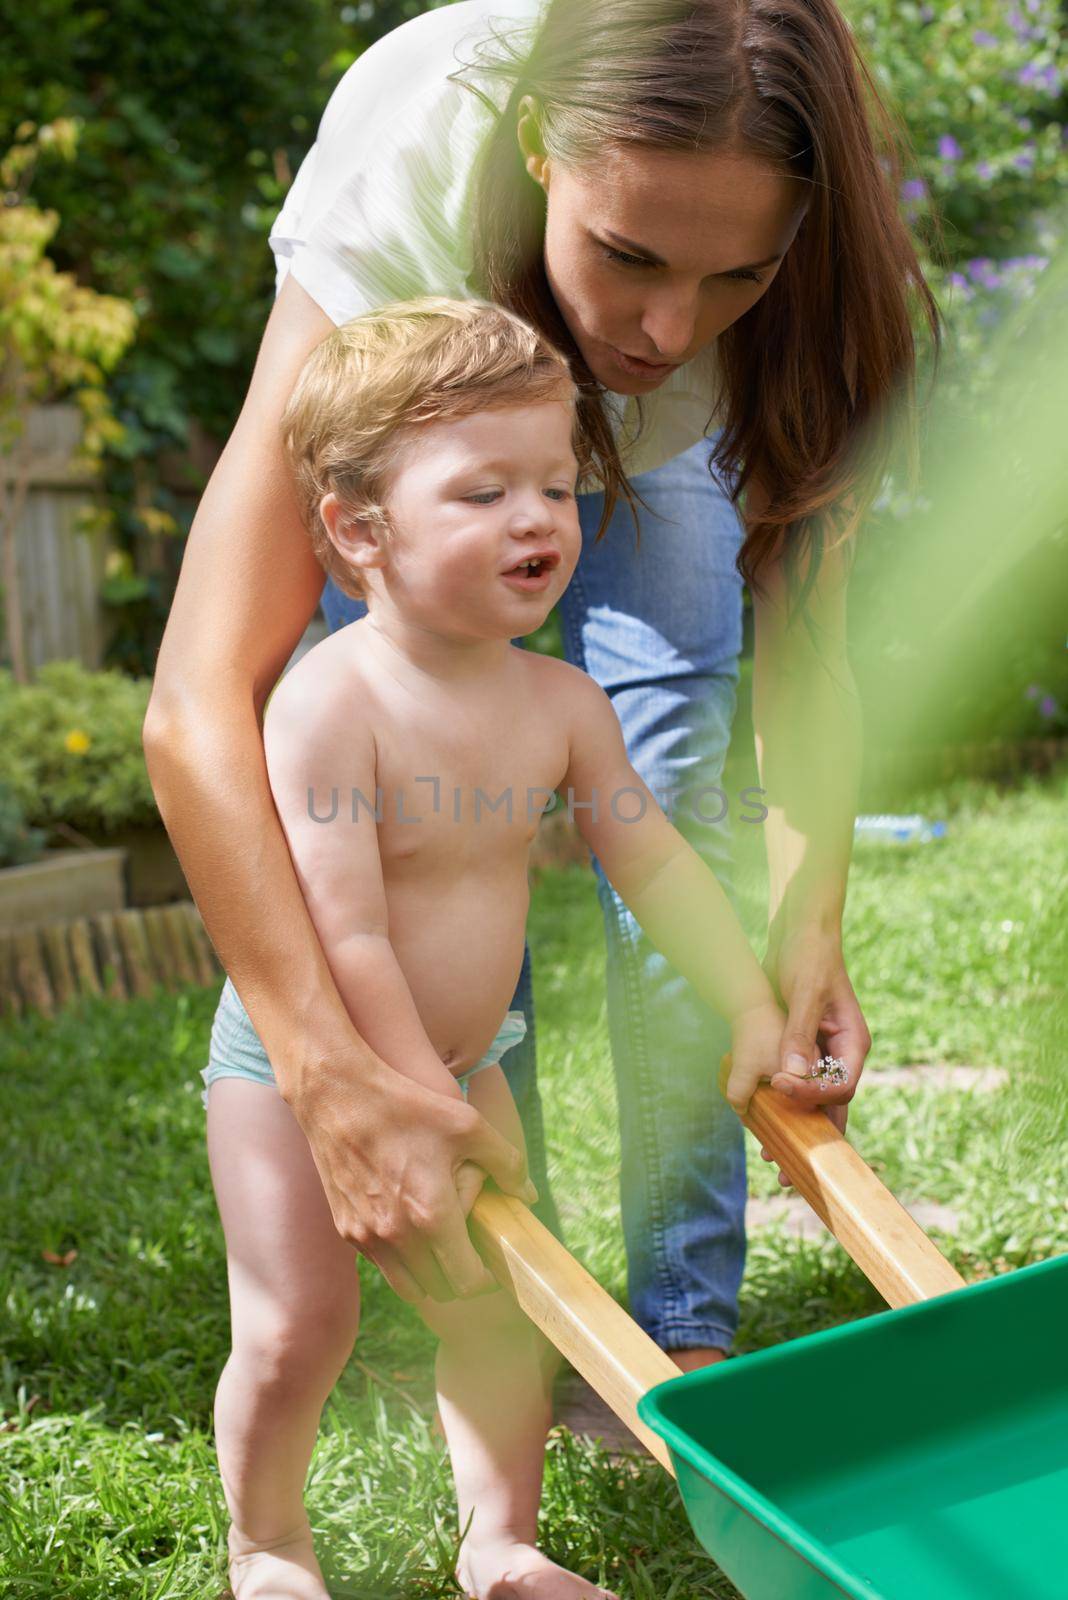 Learning about gardening. An infant boy pushing his toy wheel barrow while his mother helps